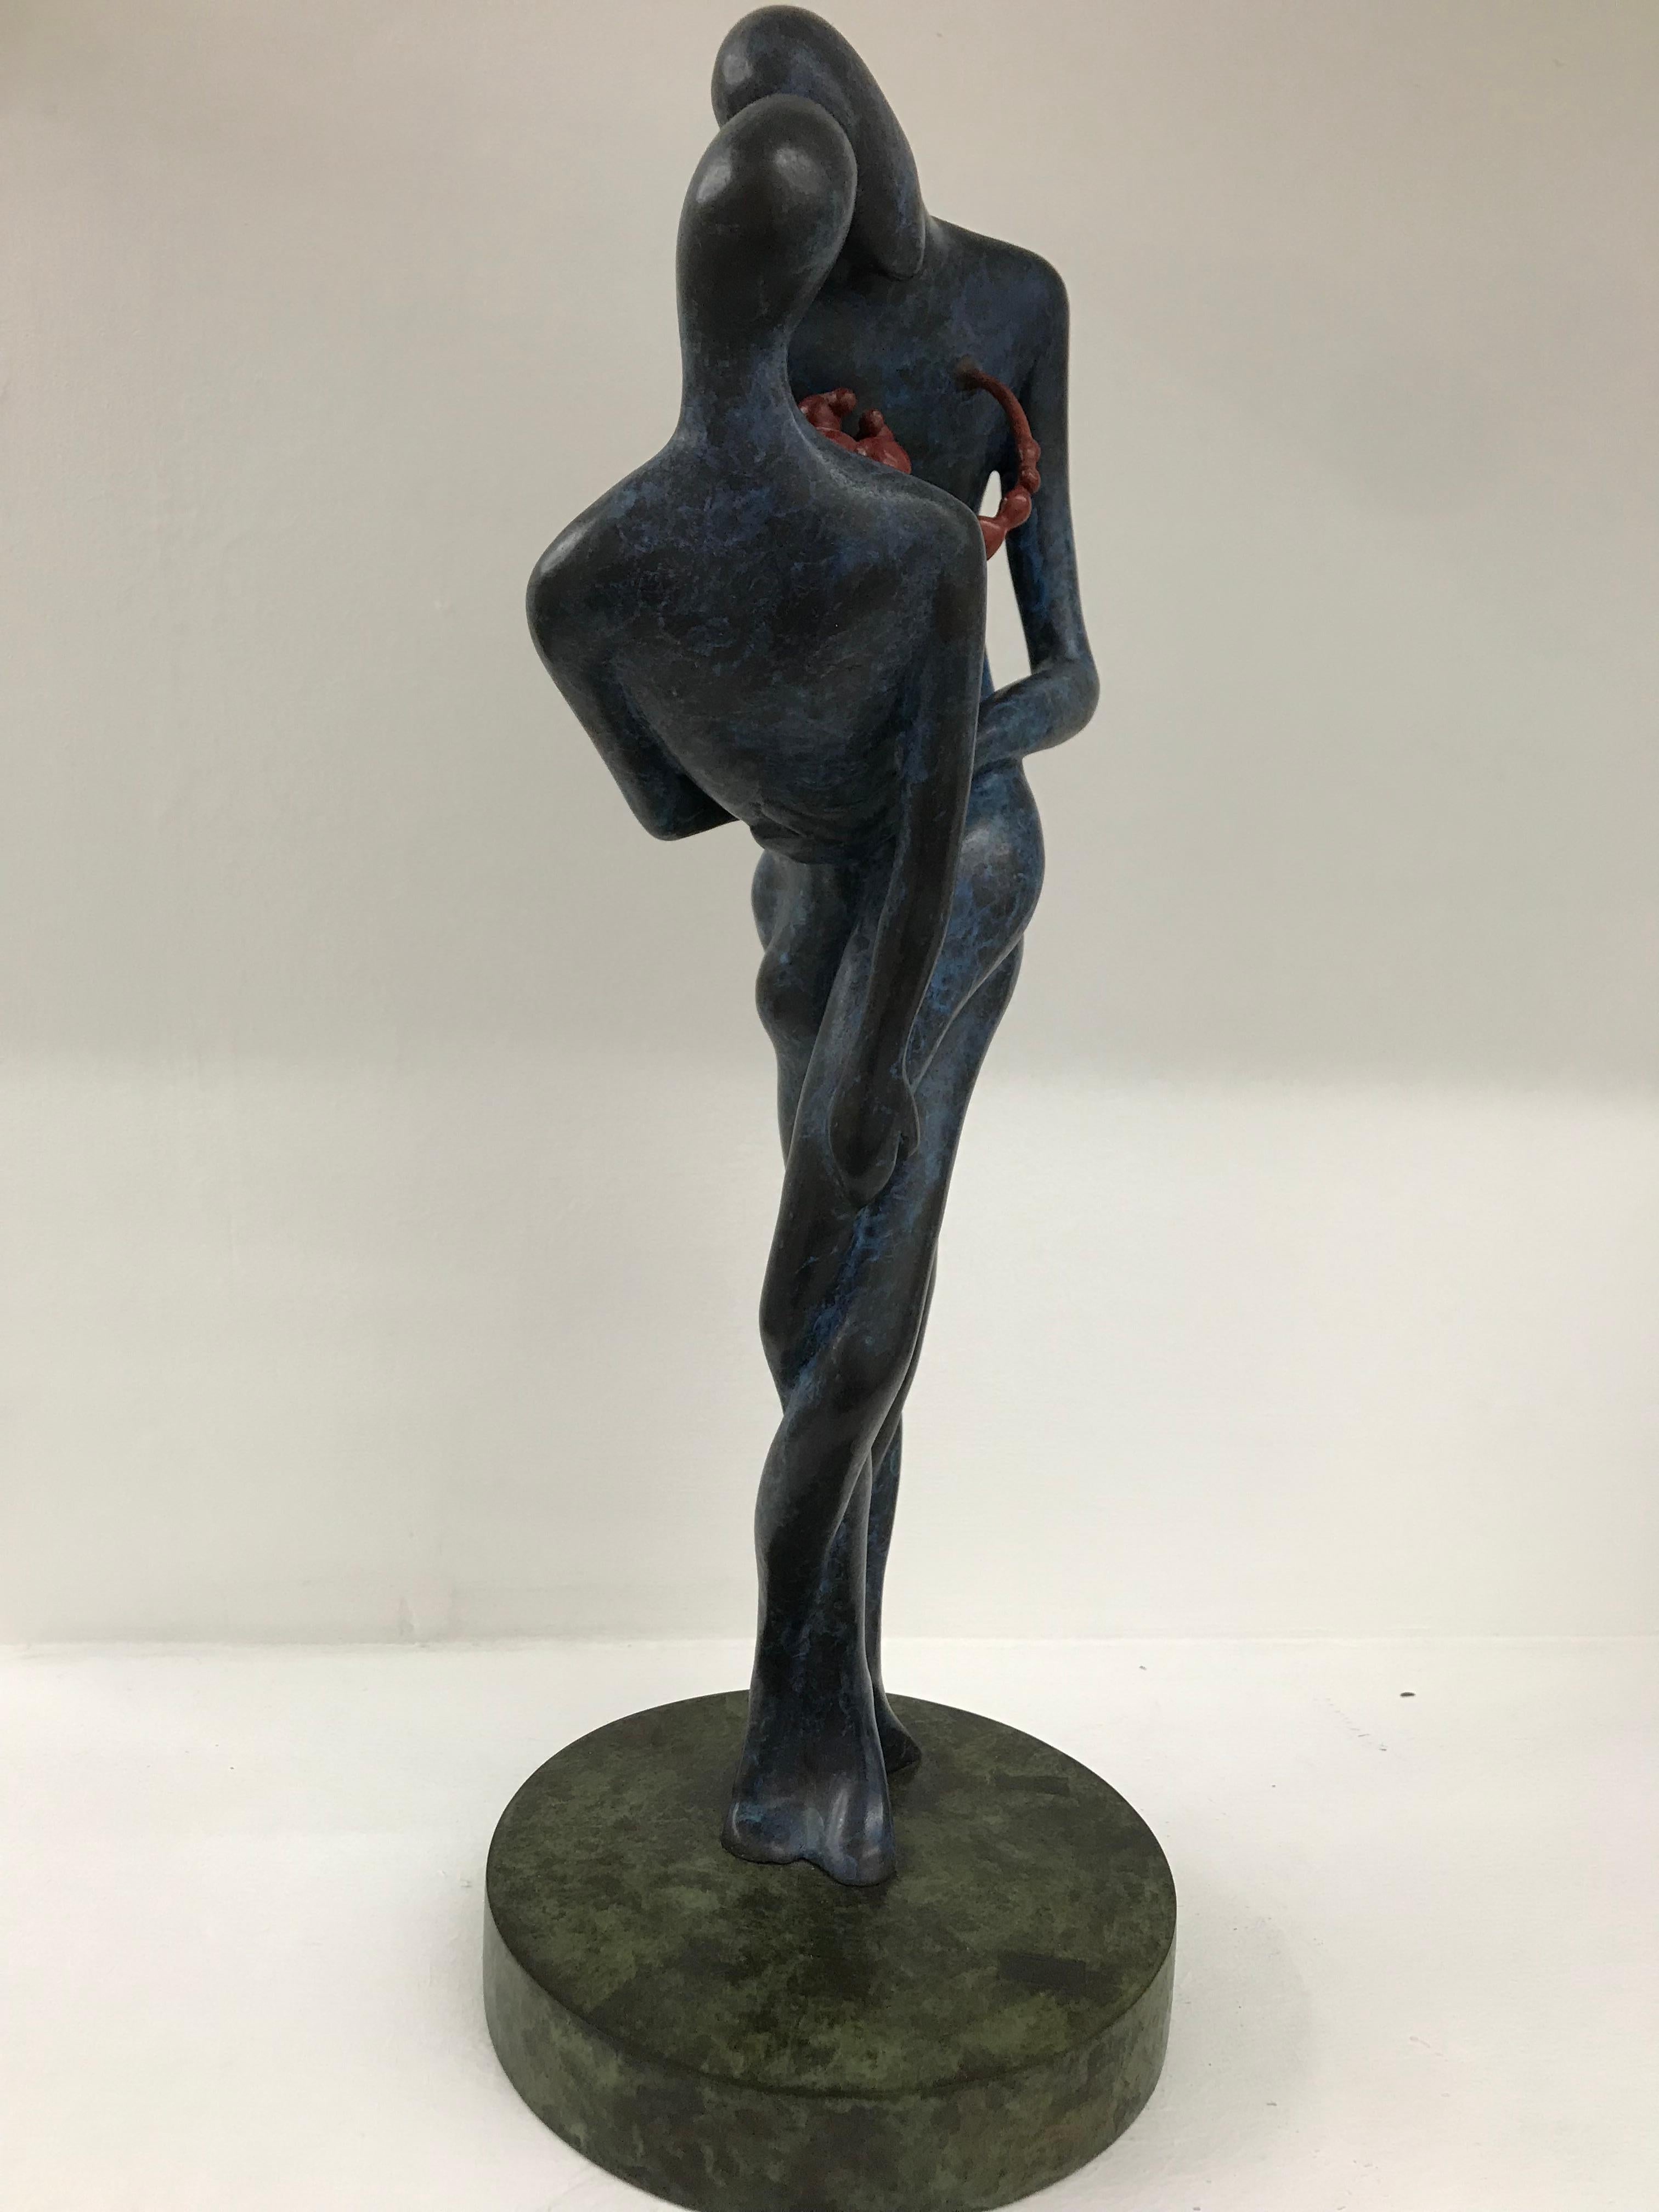 Love, Man and Woman : Contemporary, figurative bronze sculpture, blue and red - Gold Figurative Sculpture by Garn Kwankaew